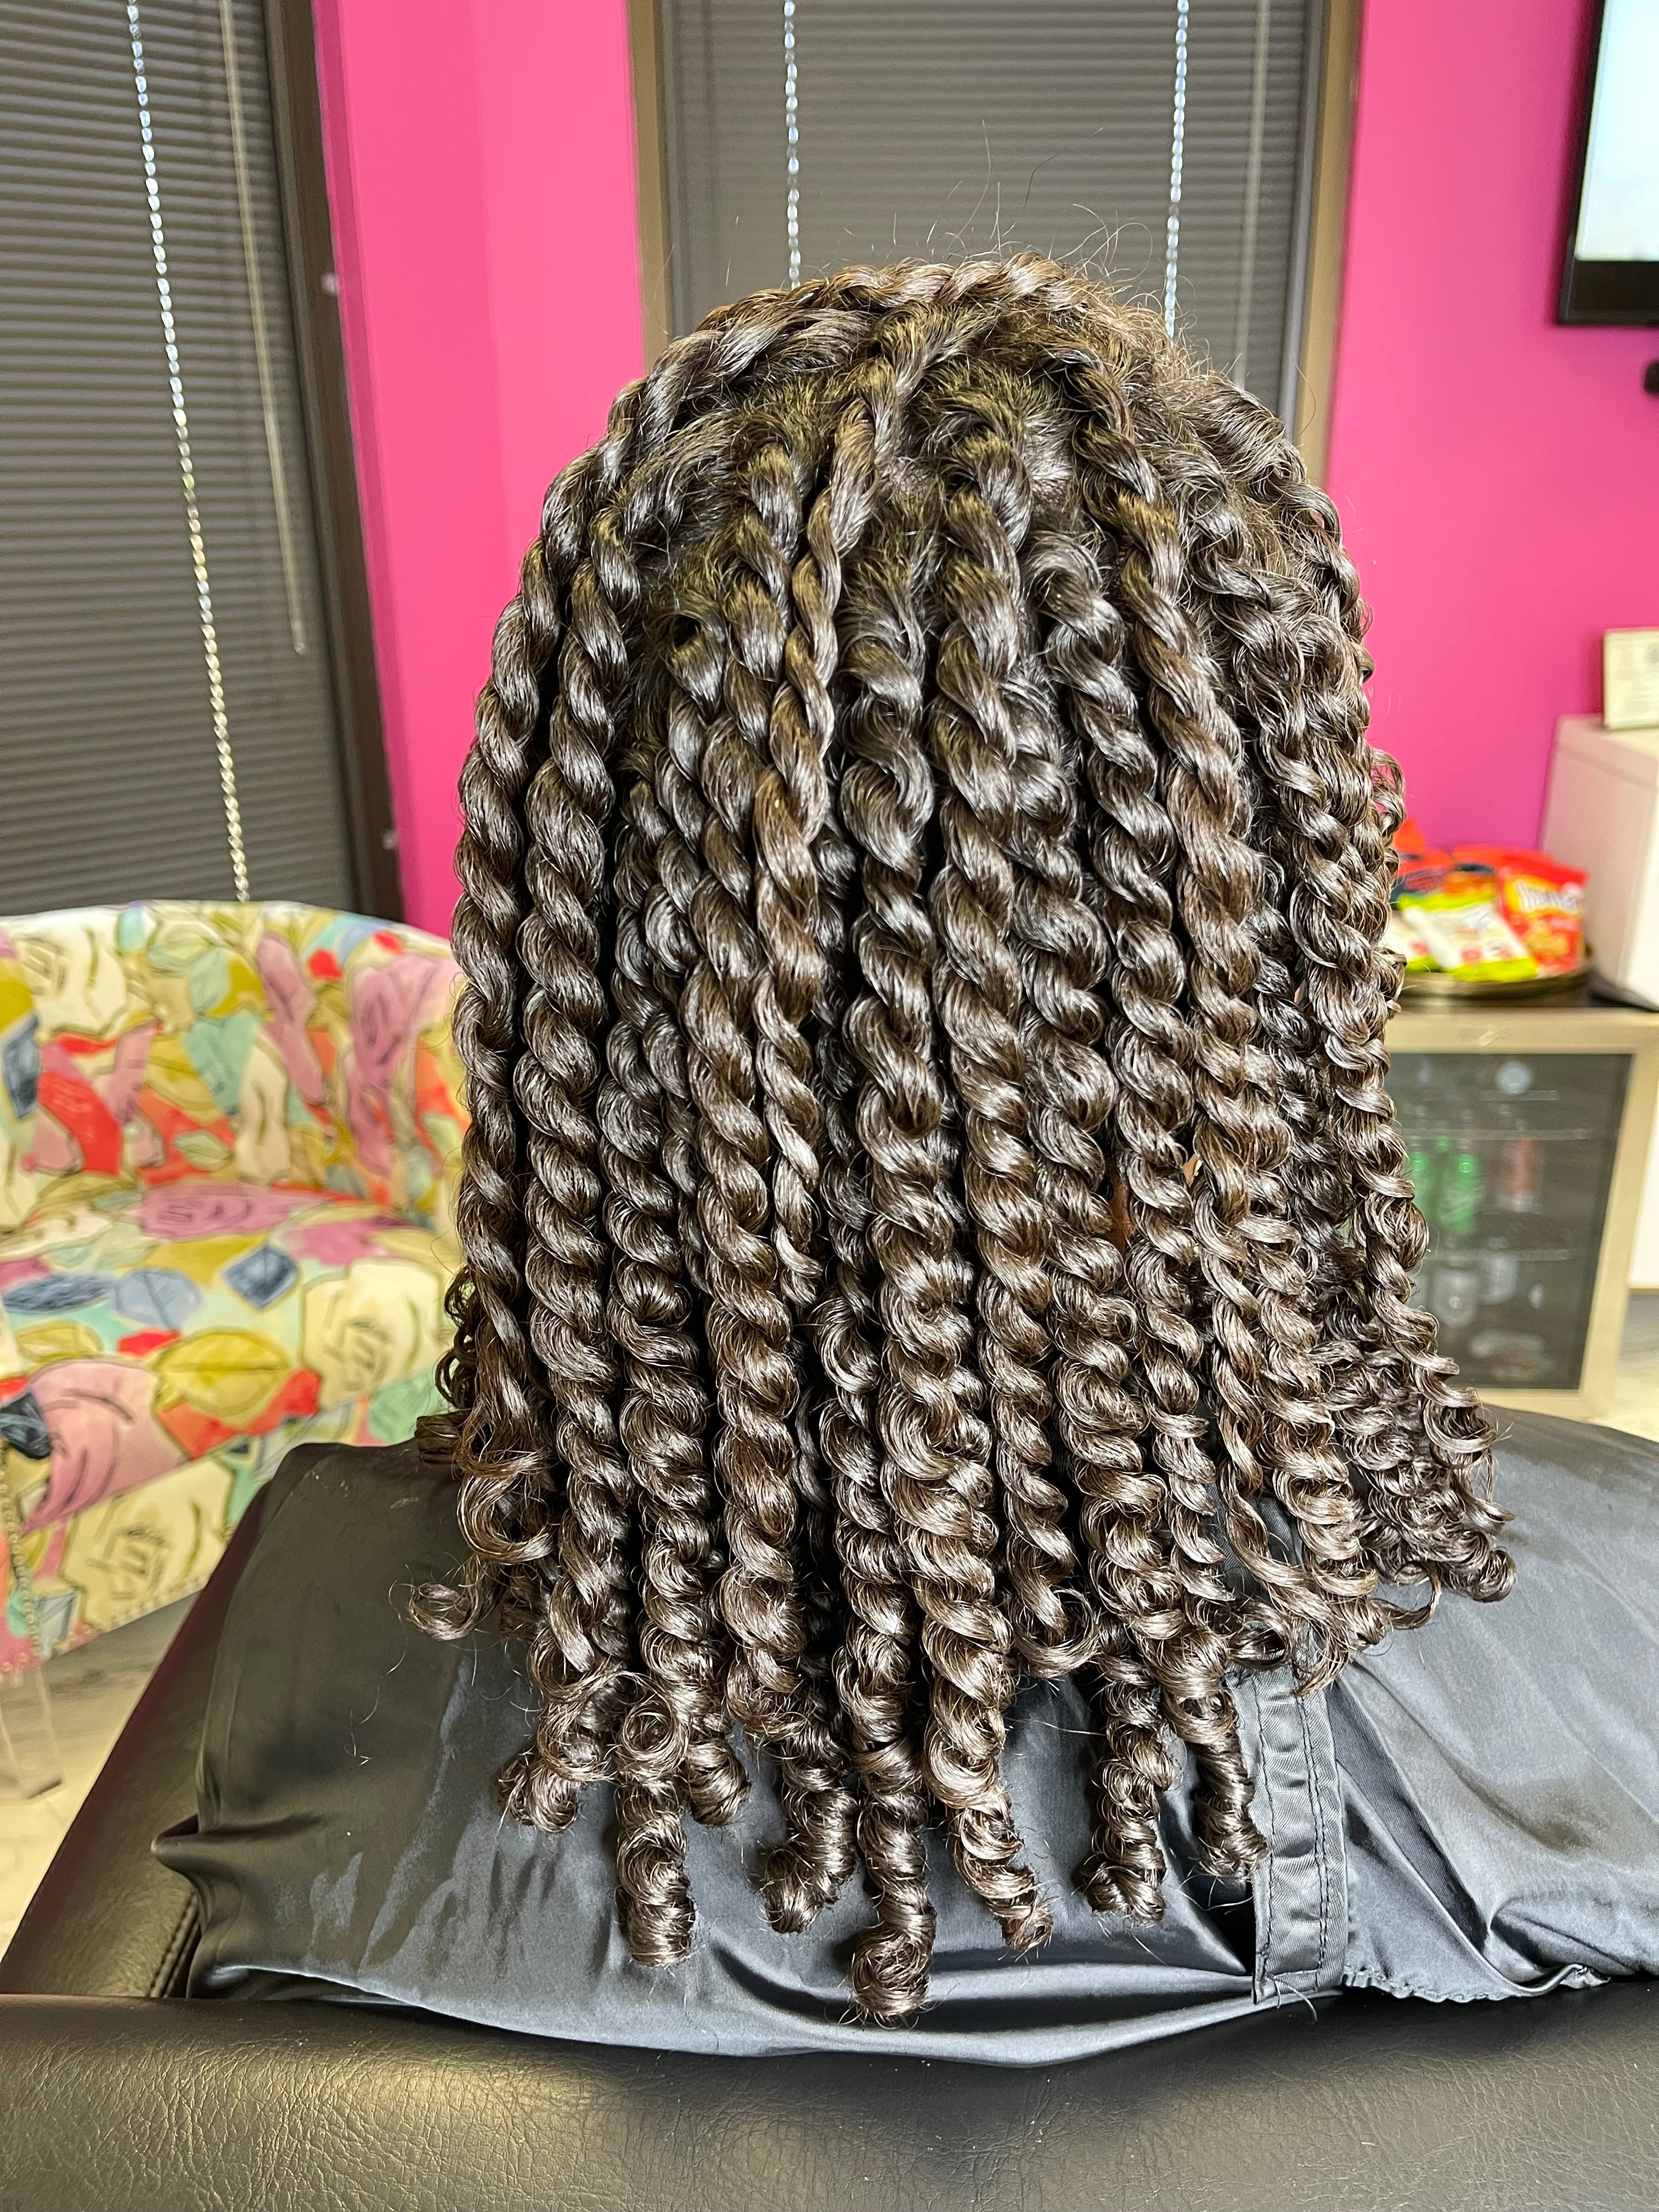 2 strand twist on long thick hair